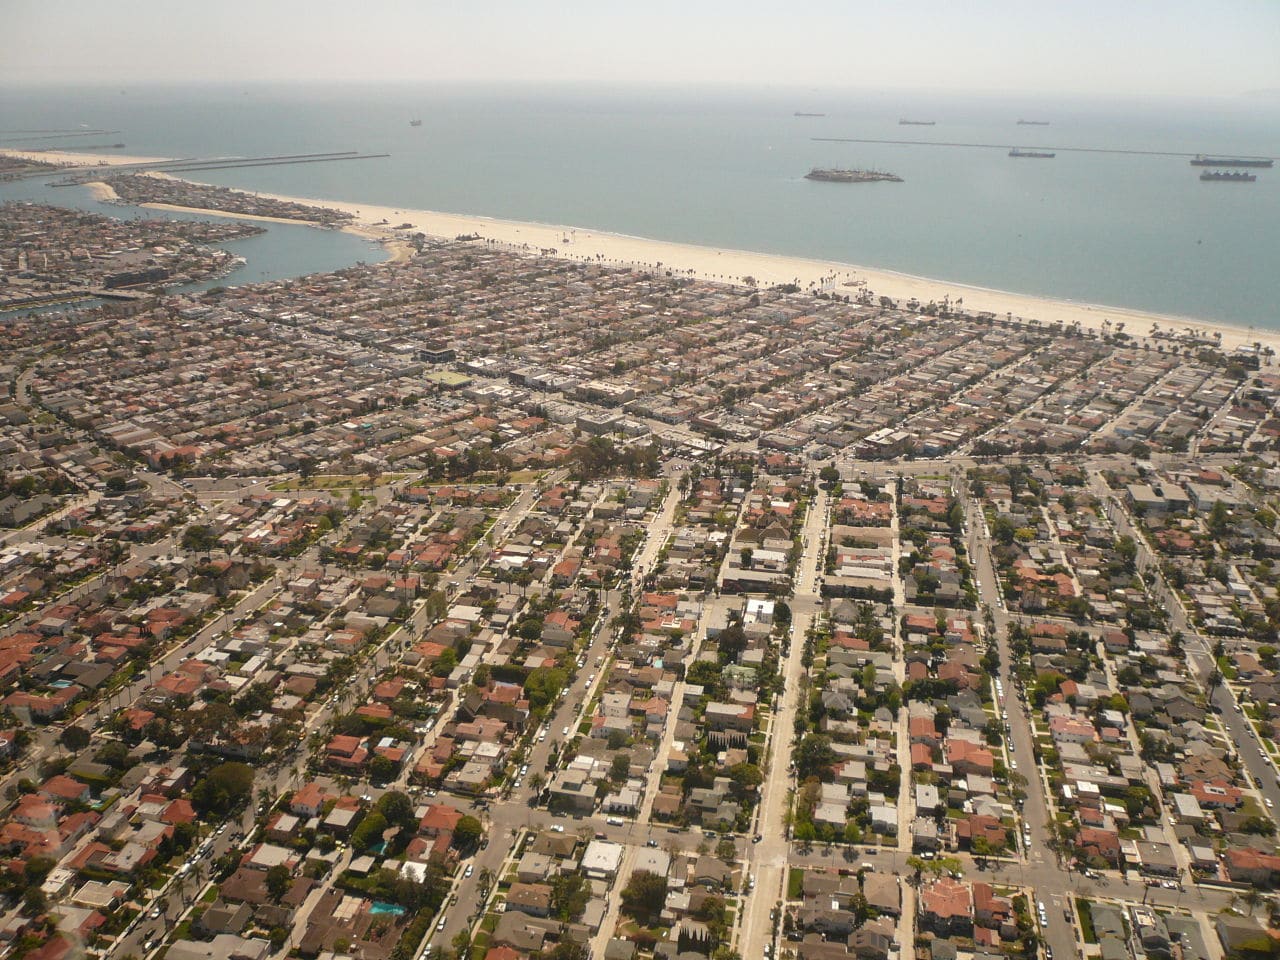 Belmont_Shore_and_Belmont_Heights_in_Long_Beach_California